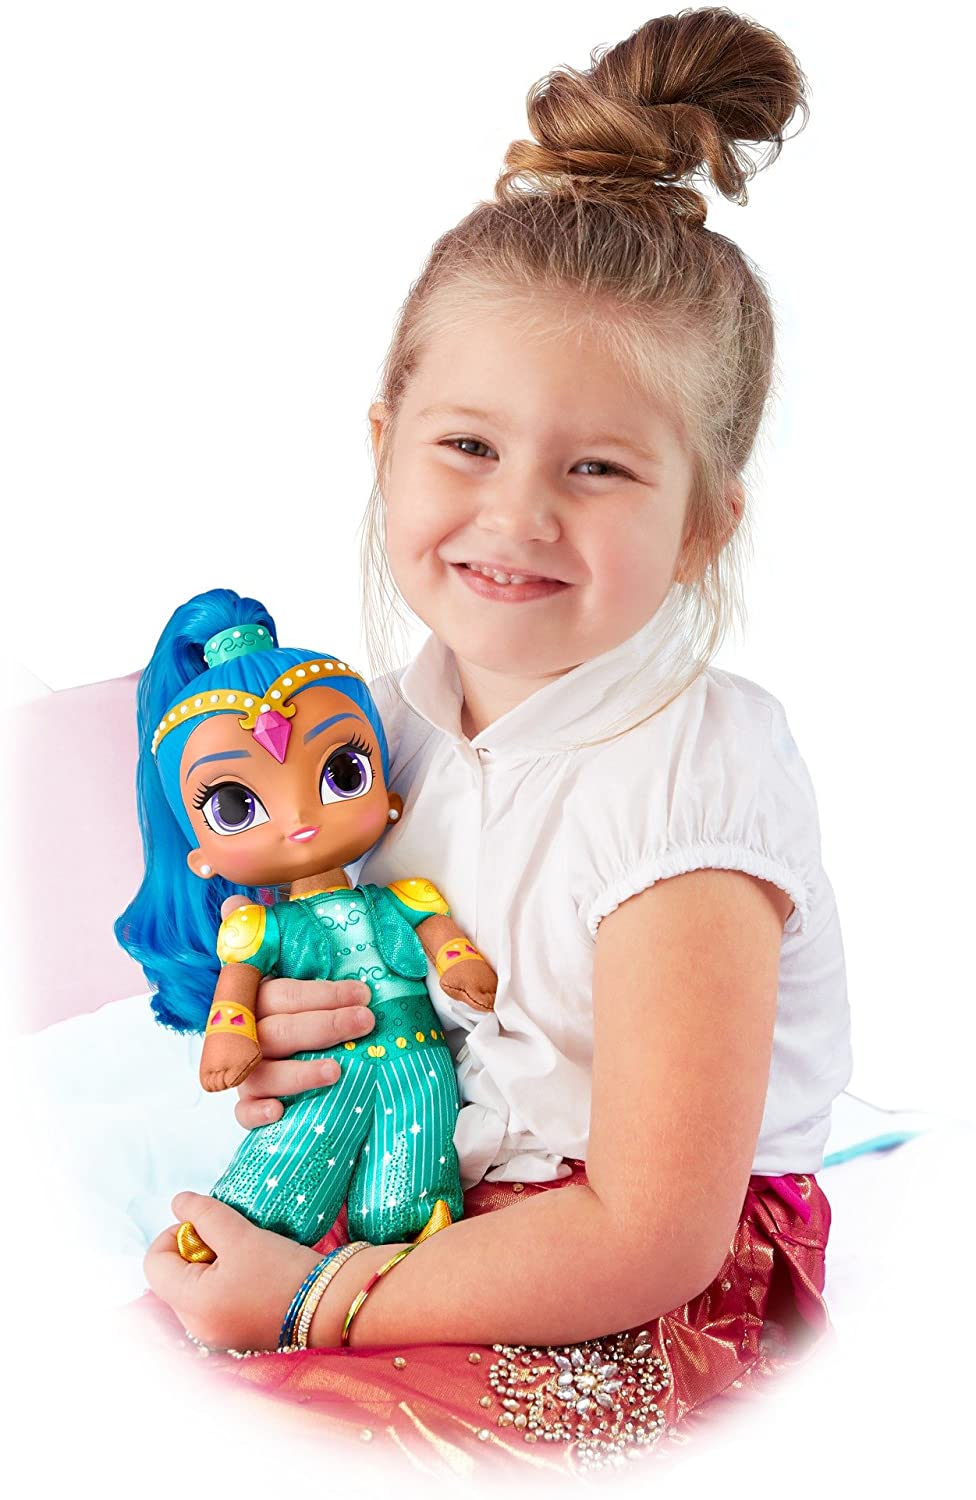 Shimmer and Shine DGM07 Talk &amp; Sing Puppe